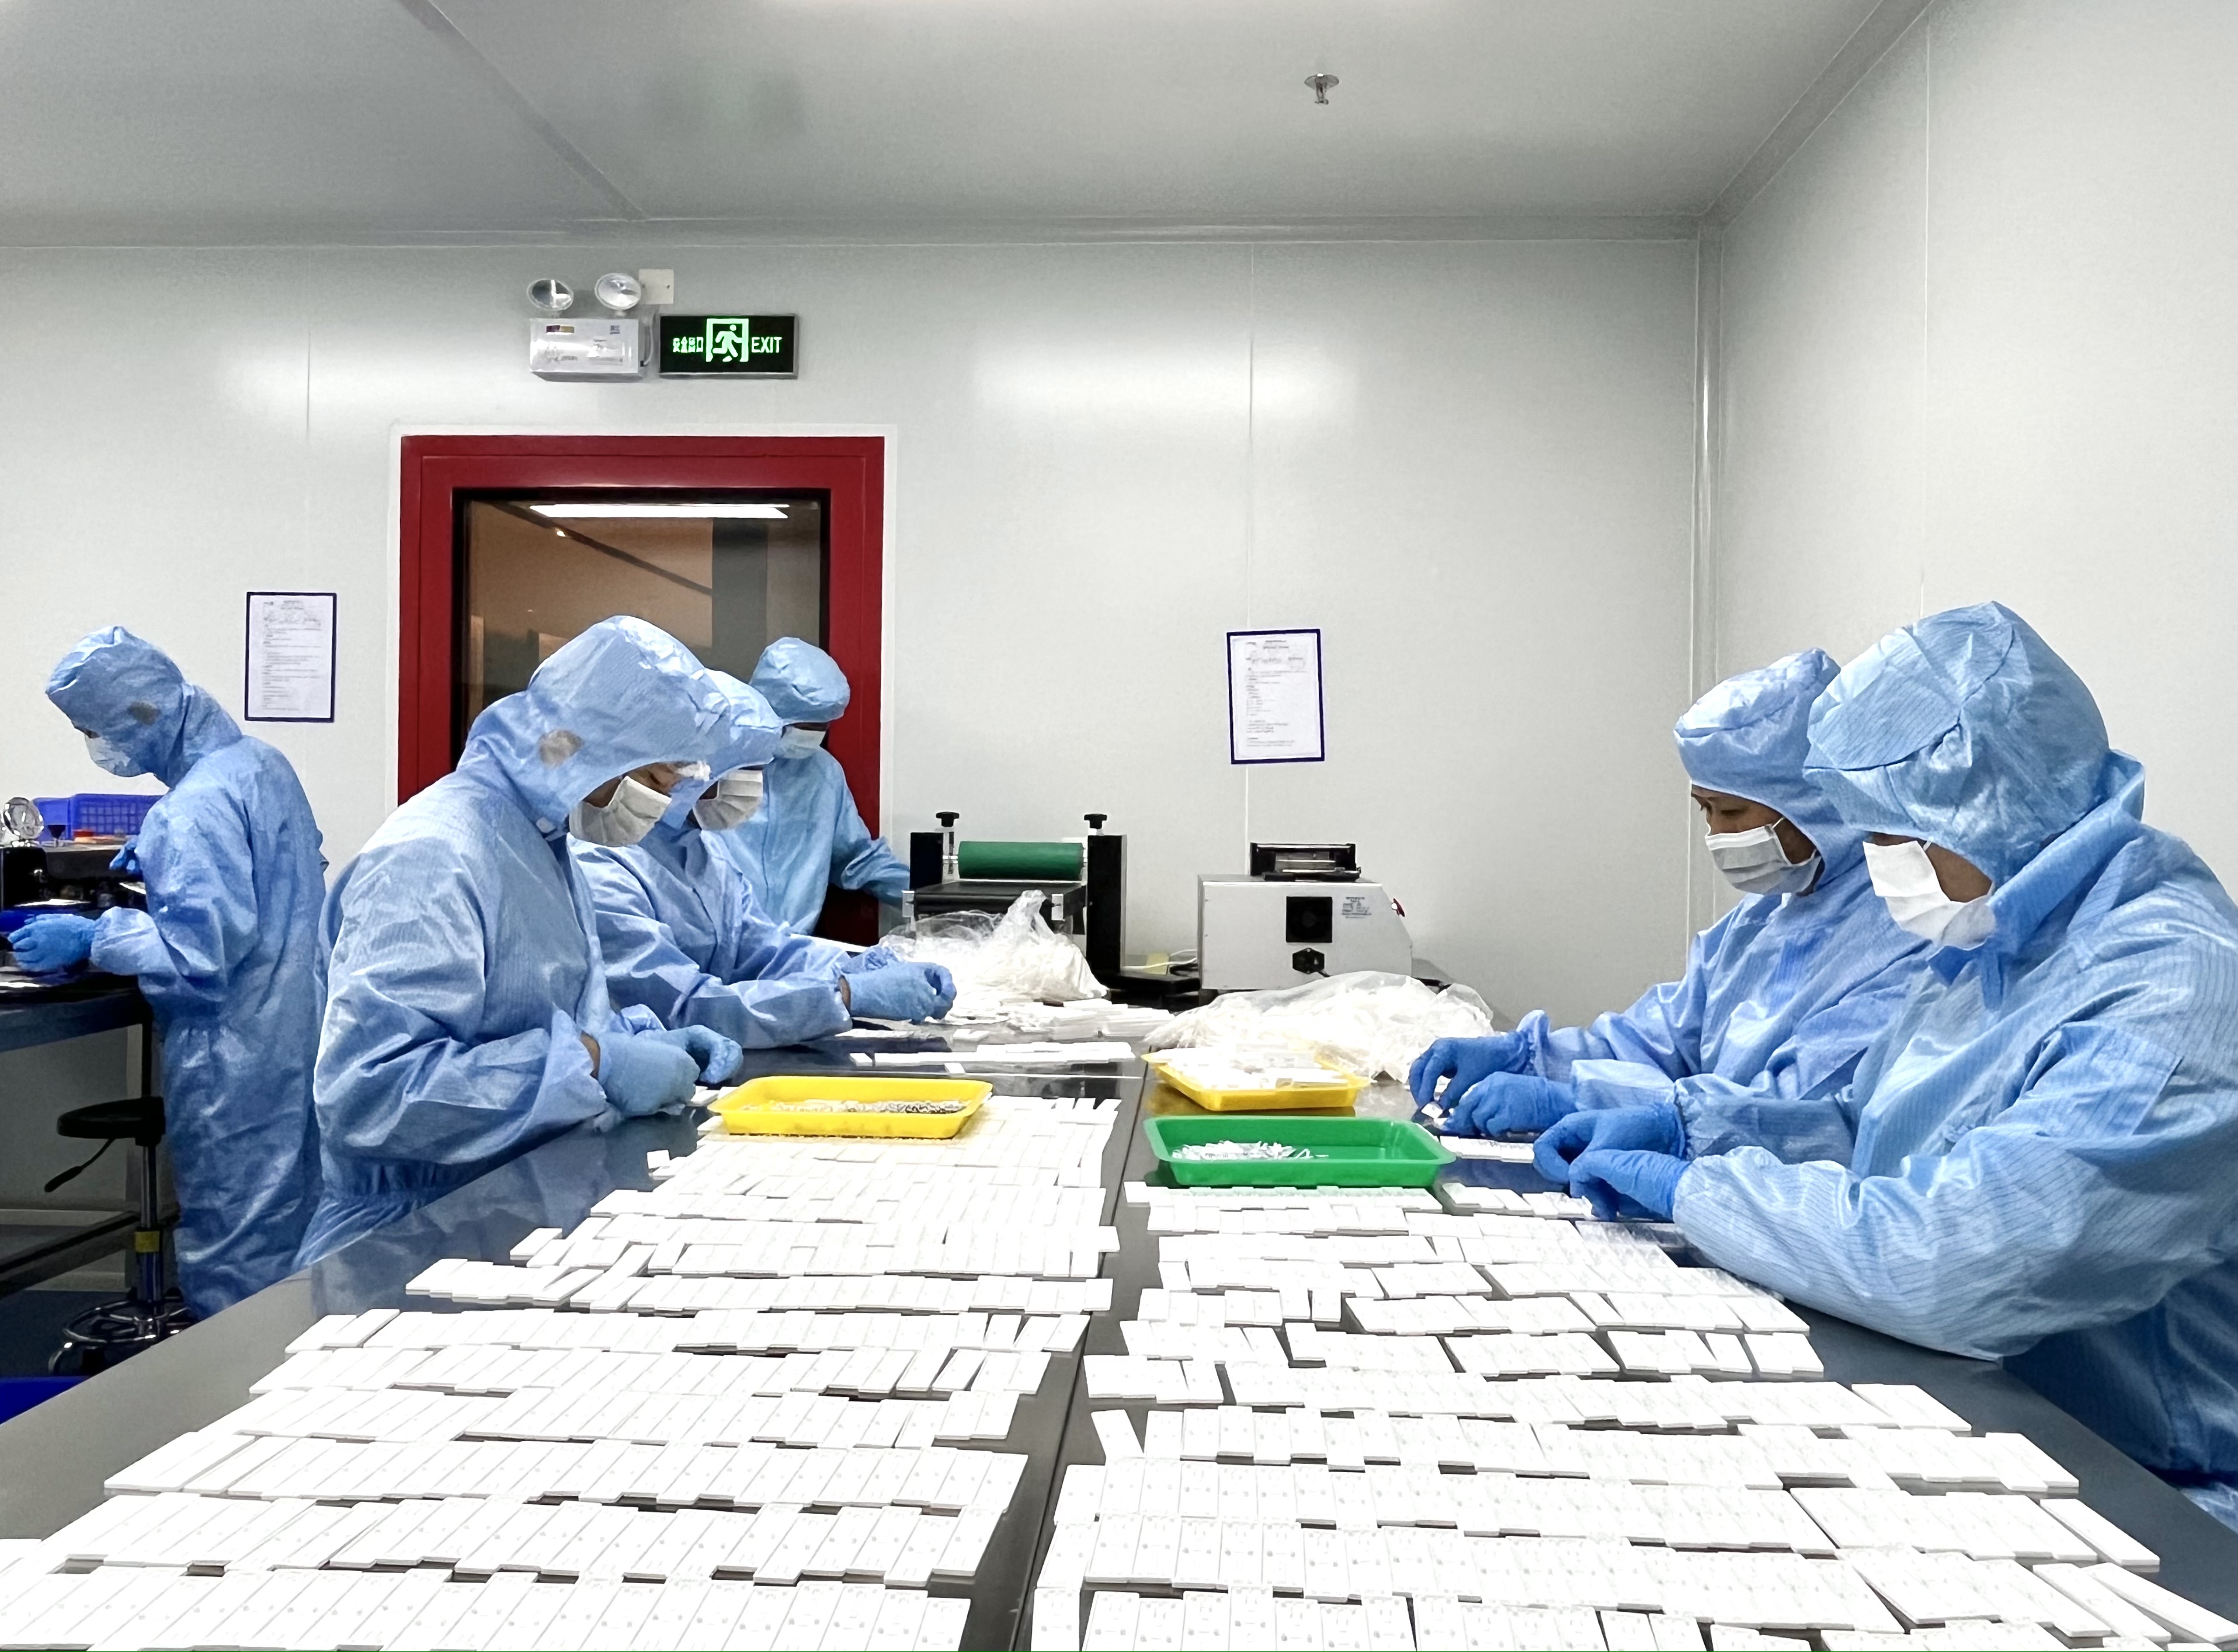 Cleanroom production